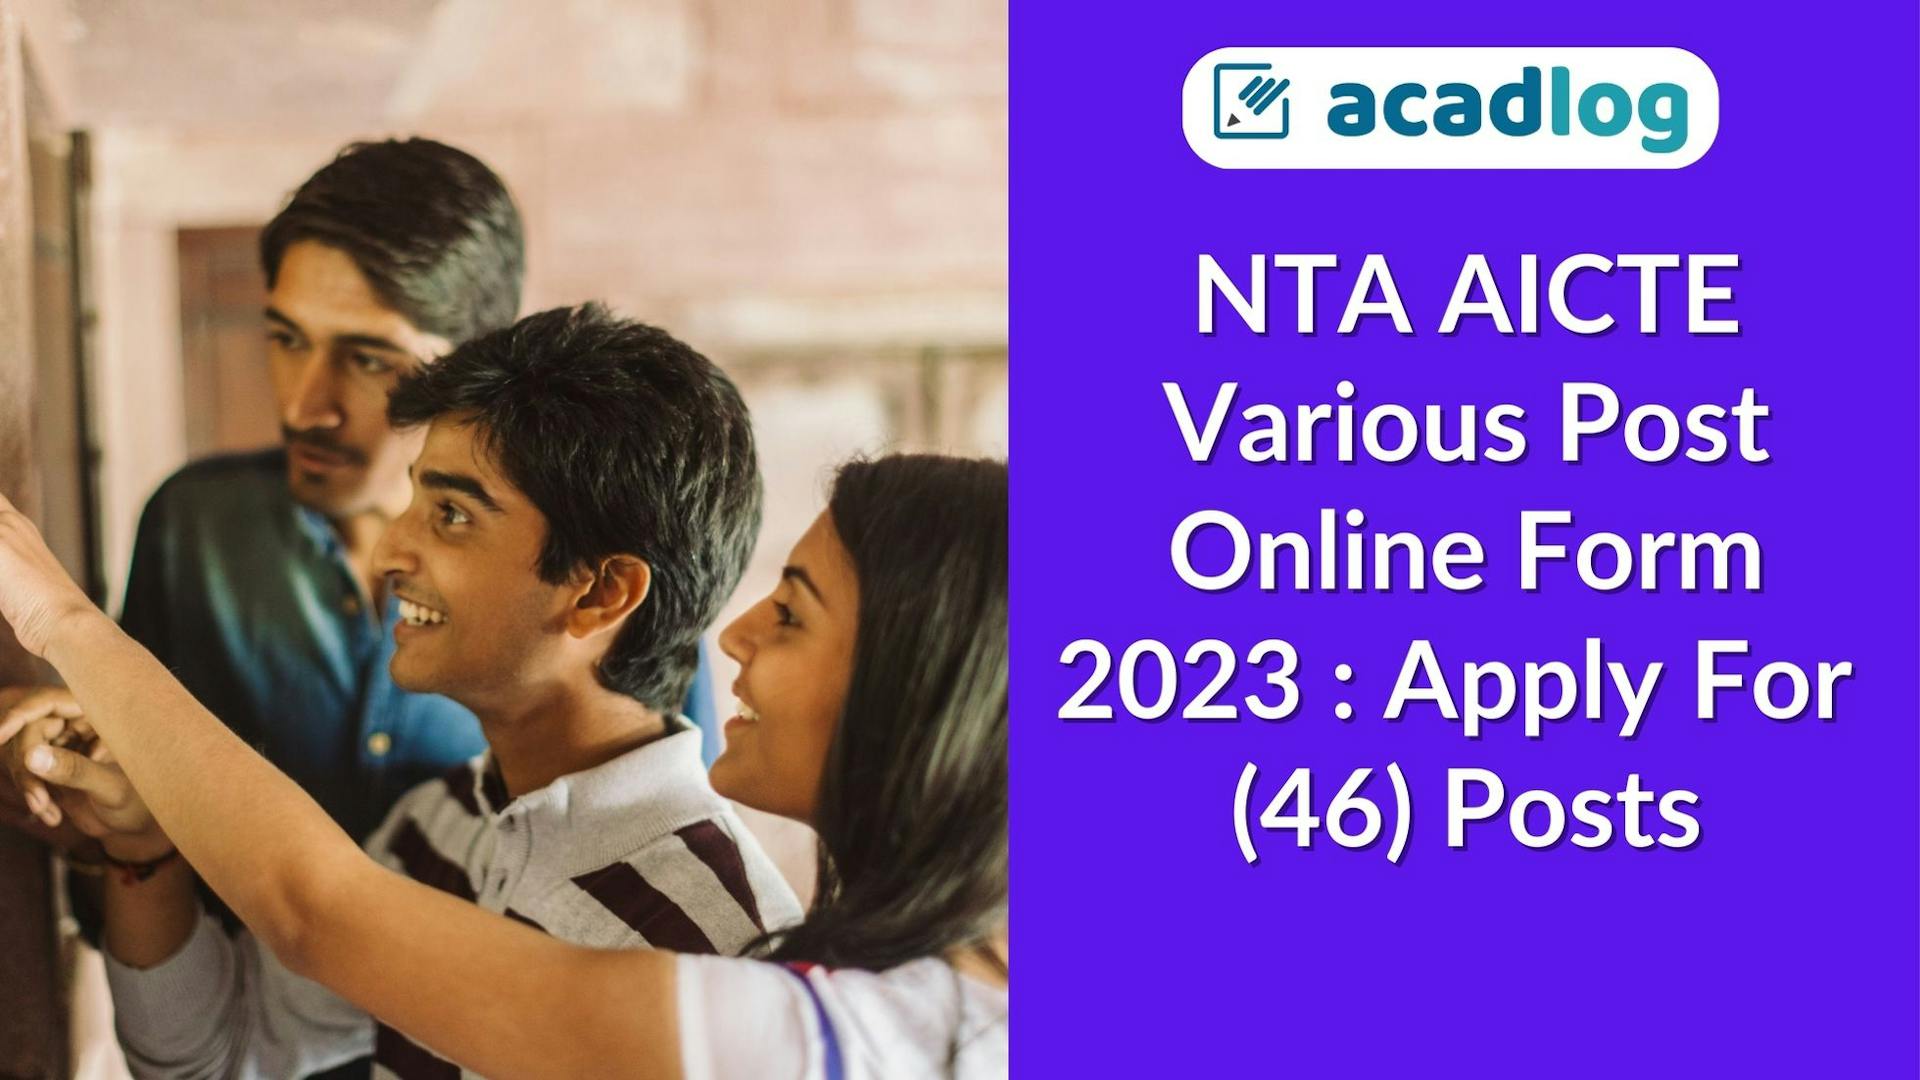 Acadlog: NTA AICTE LDC, DEO, Assistant & Other Post Recruitment 2023 Apply Online for 46 Post